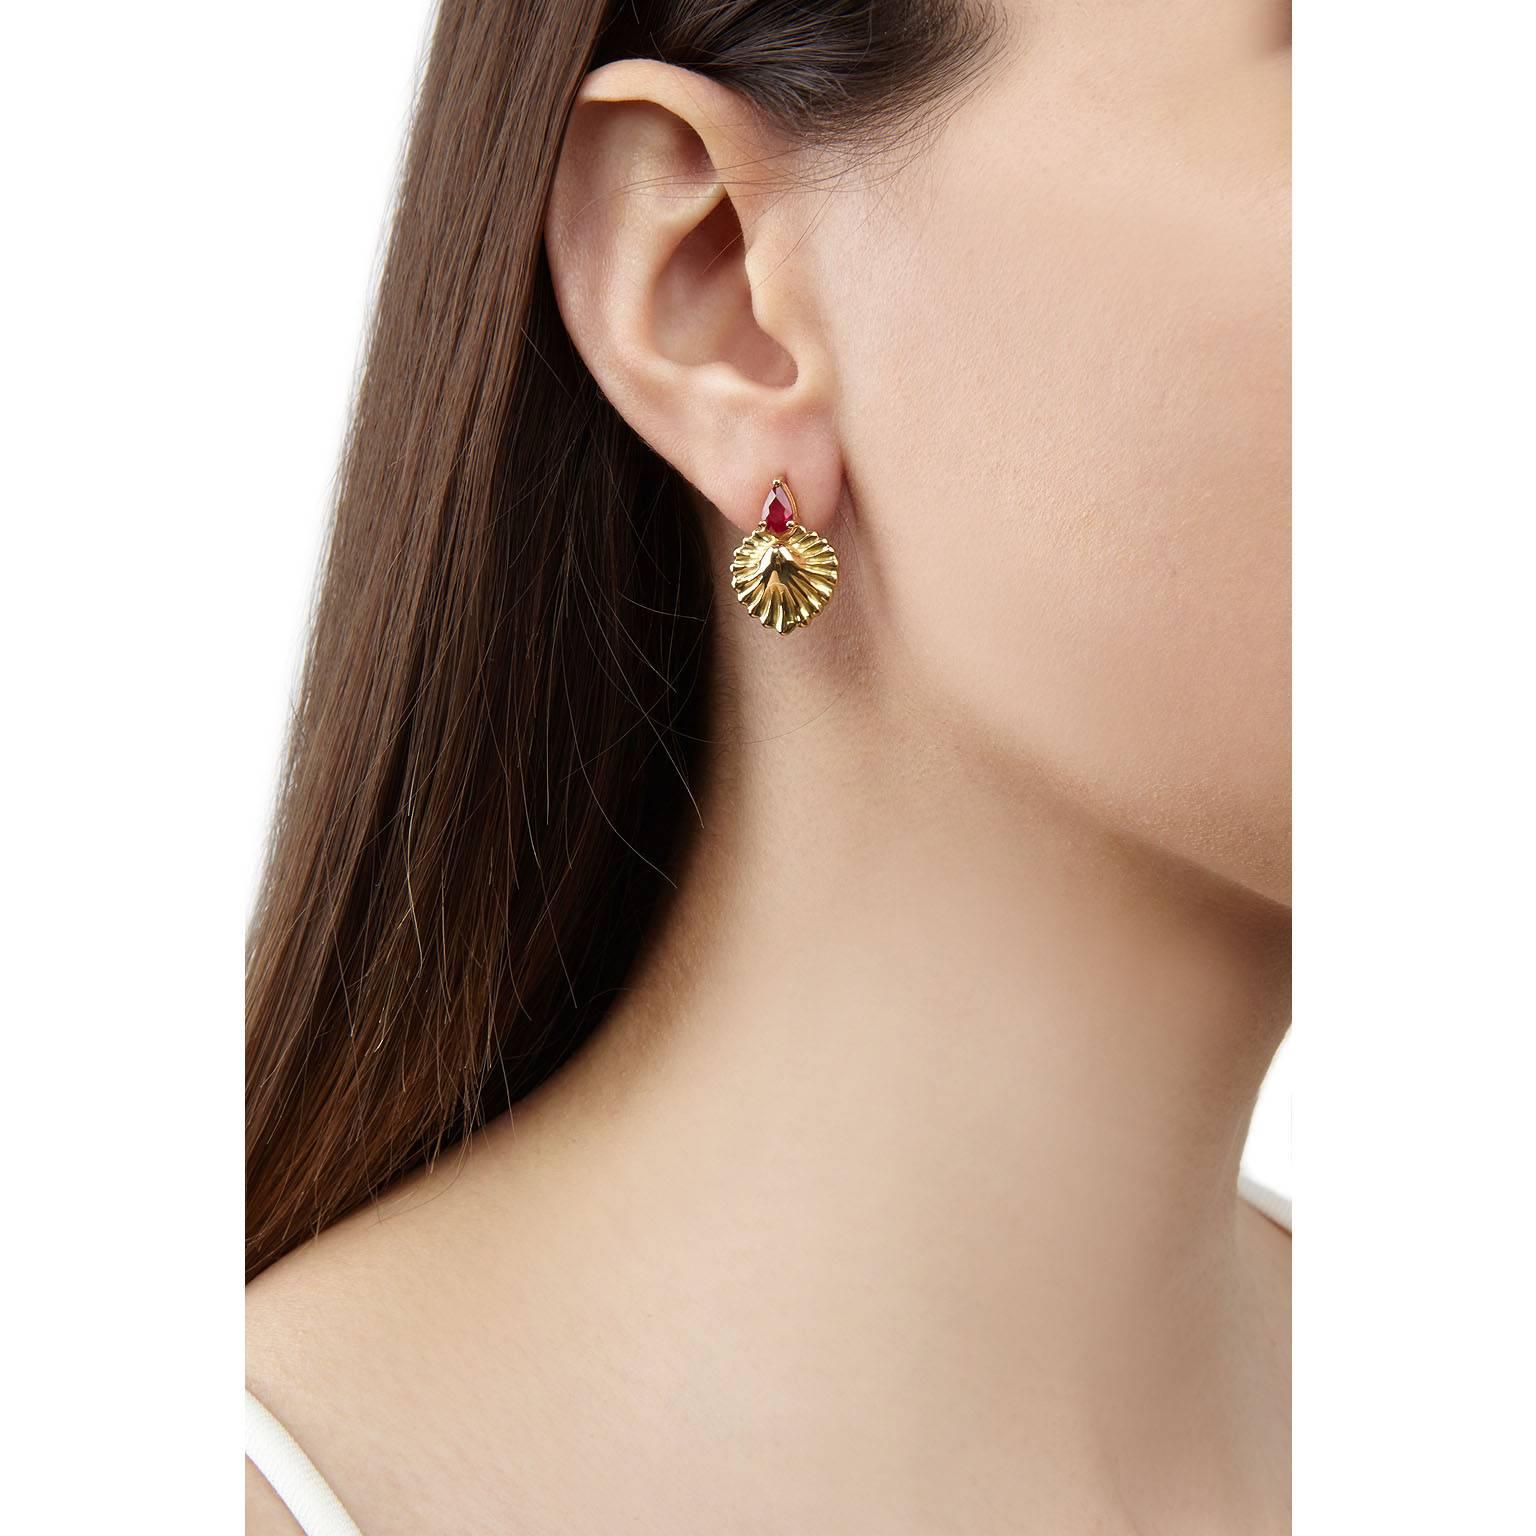 Hand carved gold shells set with vivid red pear-cut rubies.
Beautiful and elegant these earrings will add a touch of glamour to any outfit. 

0.88ct rubies set in 18k yellow gold.

Handmade in London, England.